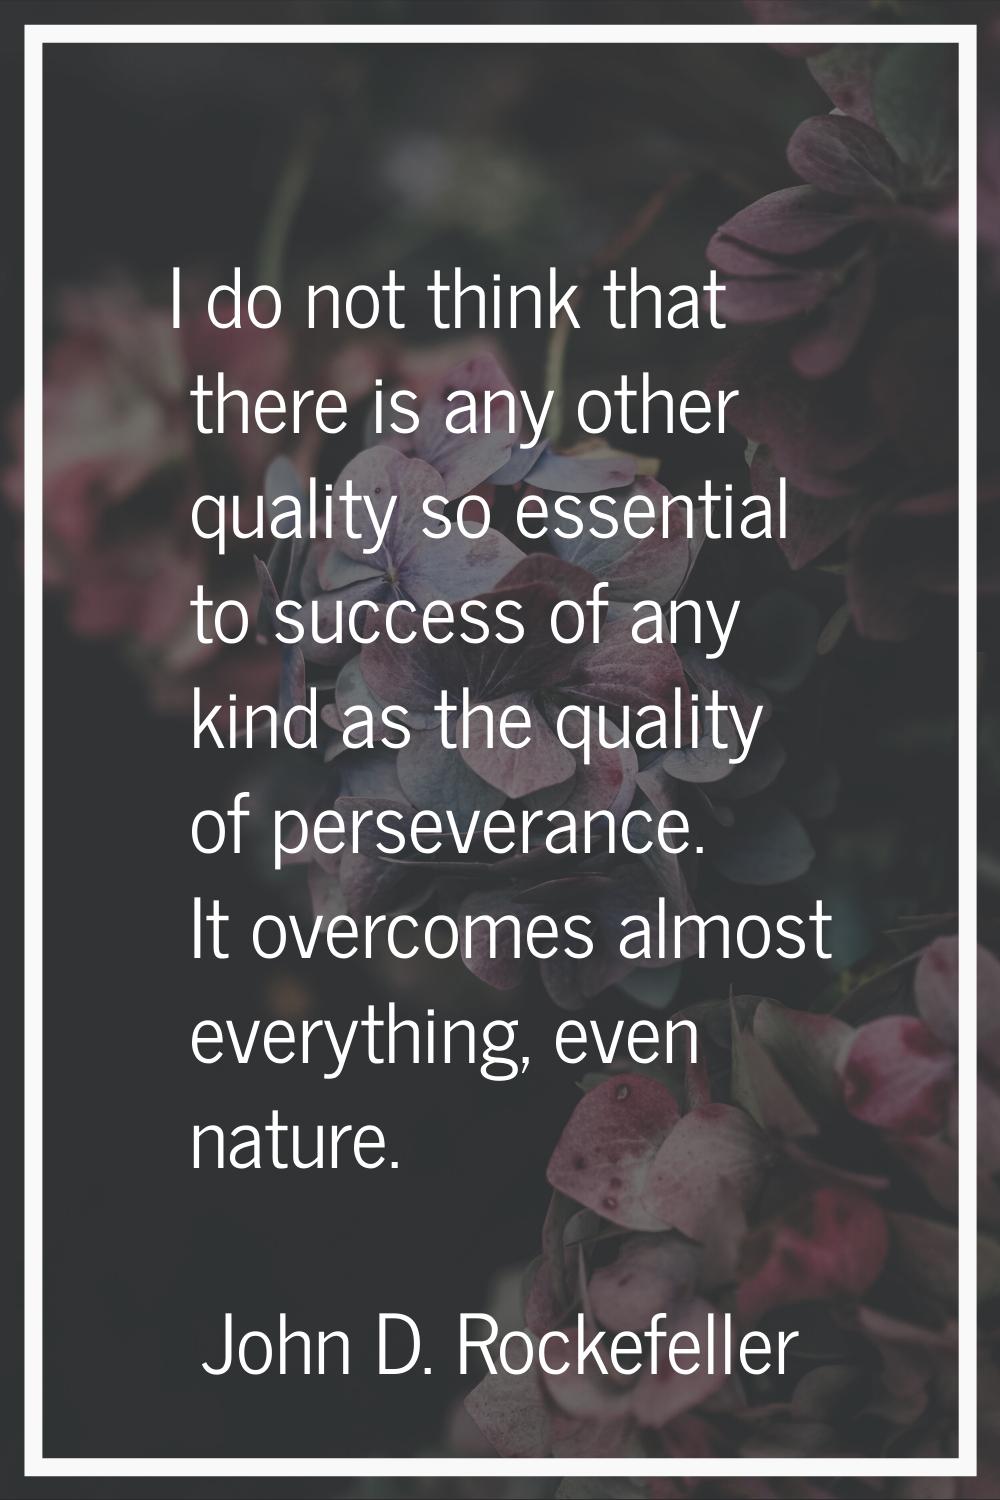 I do not think that there is any other quality so essential to success of any kind as the quality o